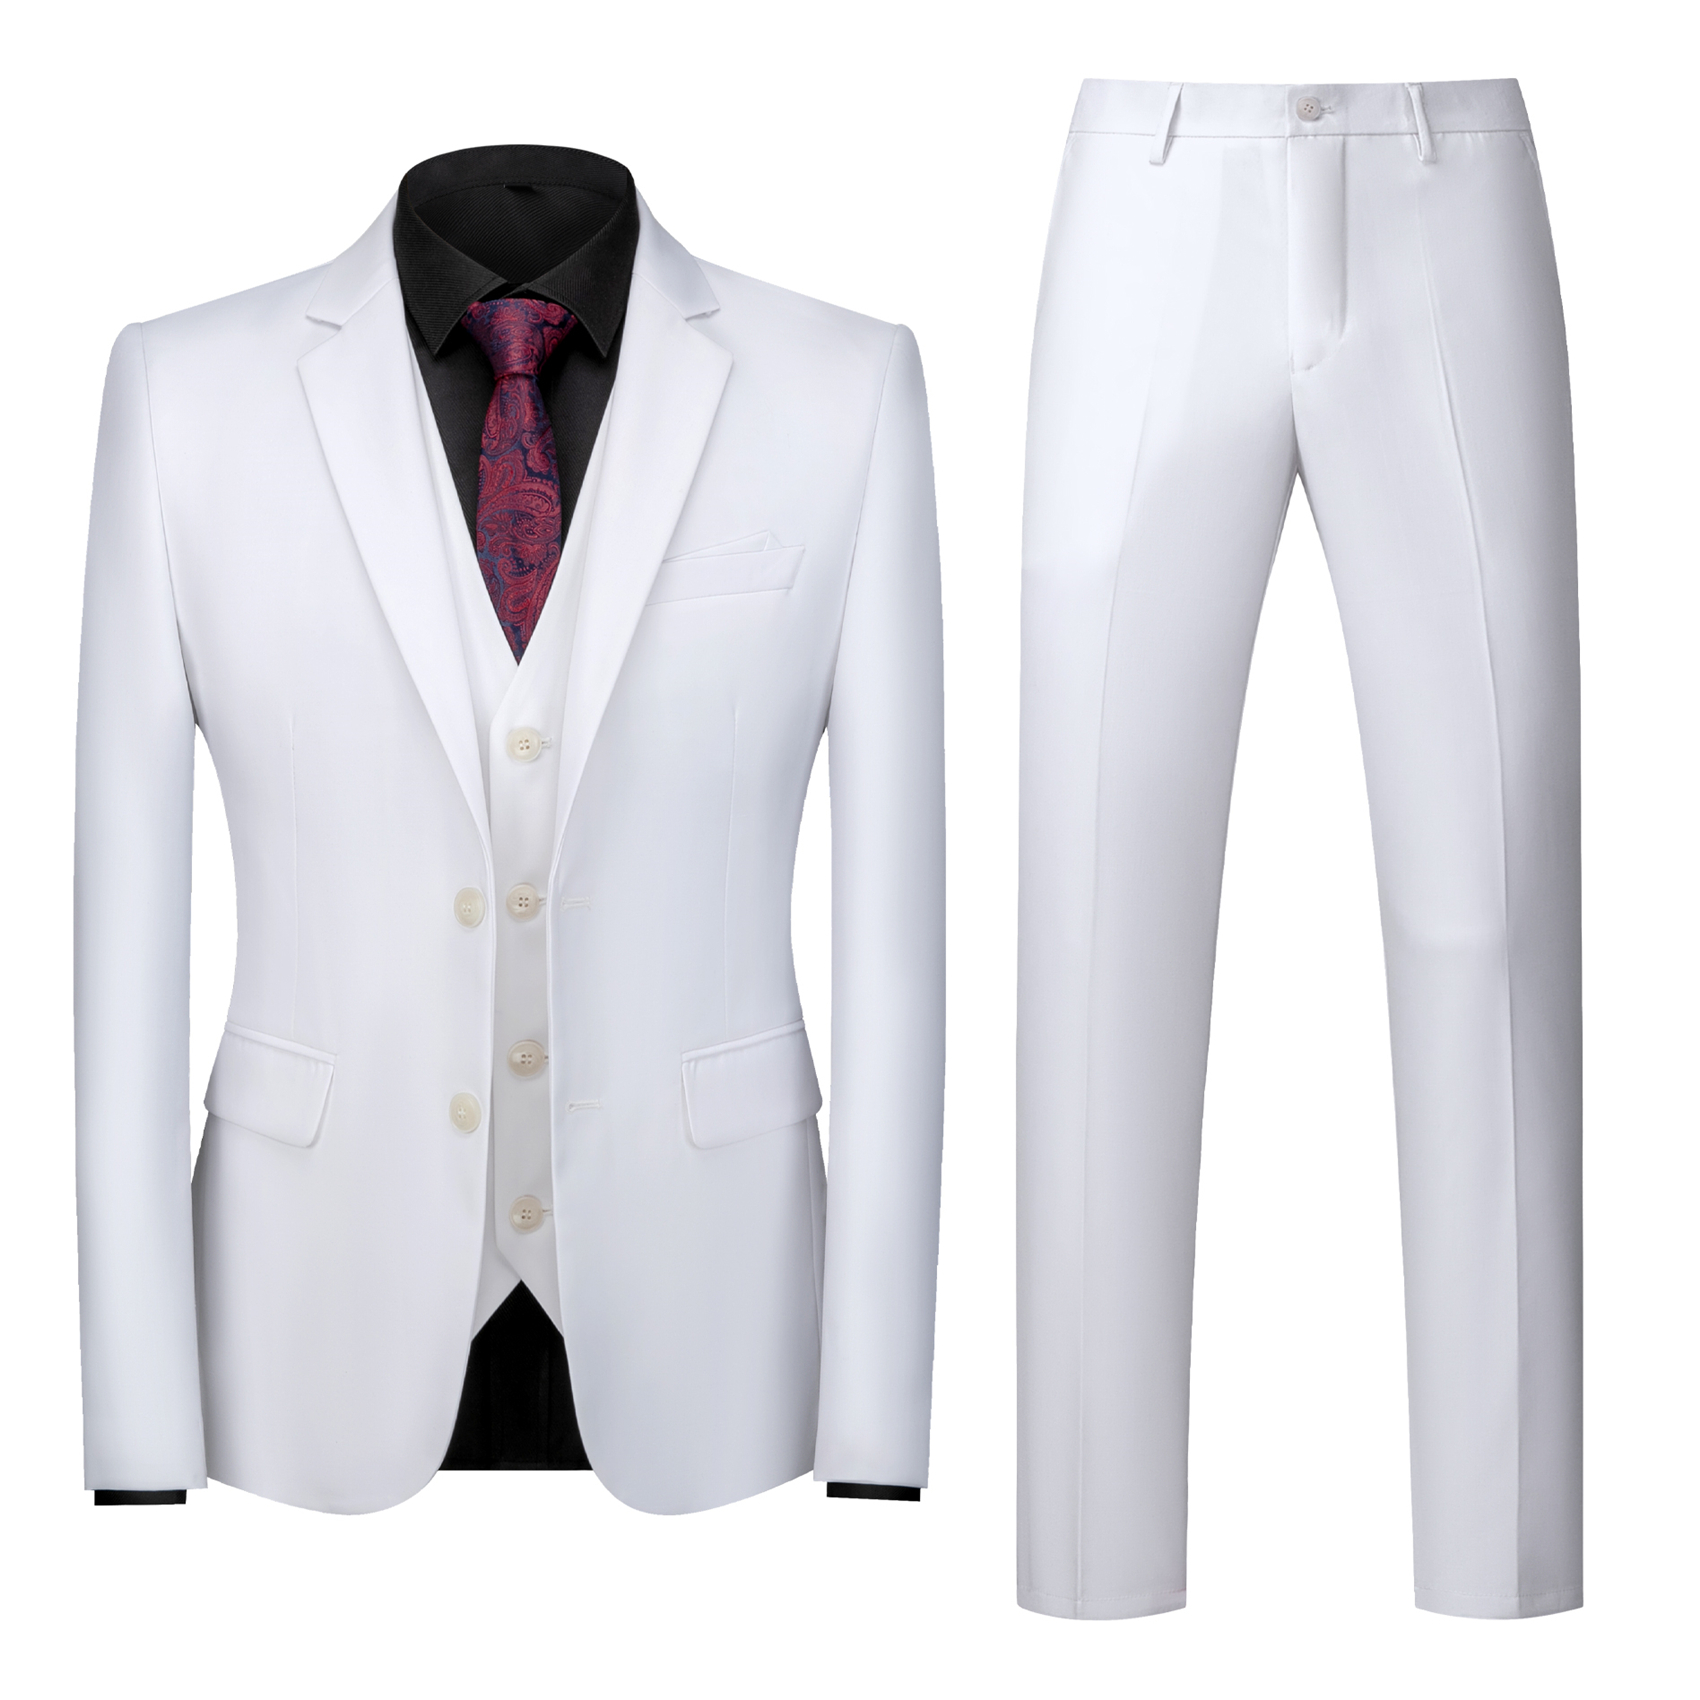 Men’s 3 Piece Solid Suit in White